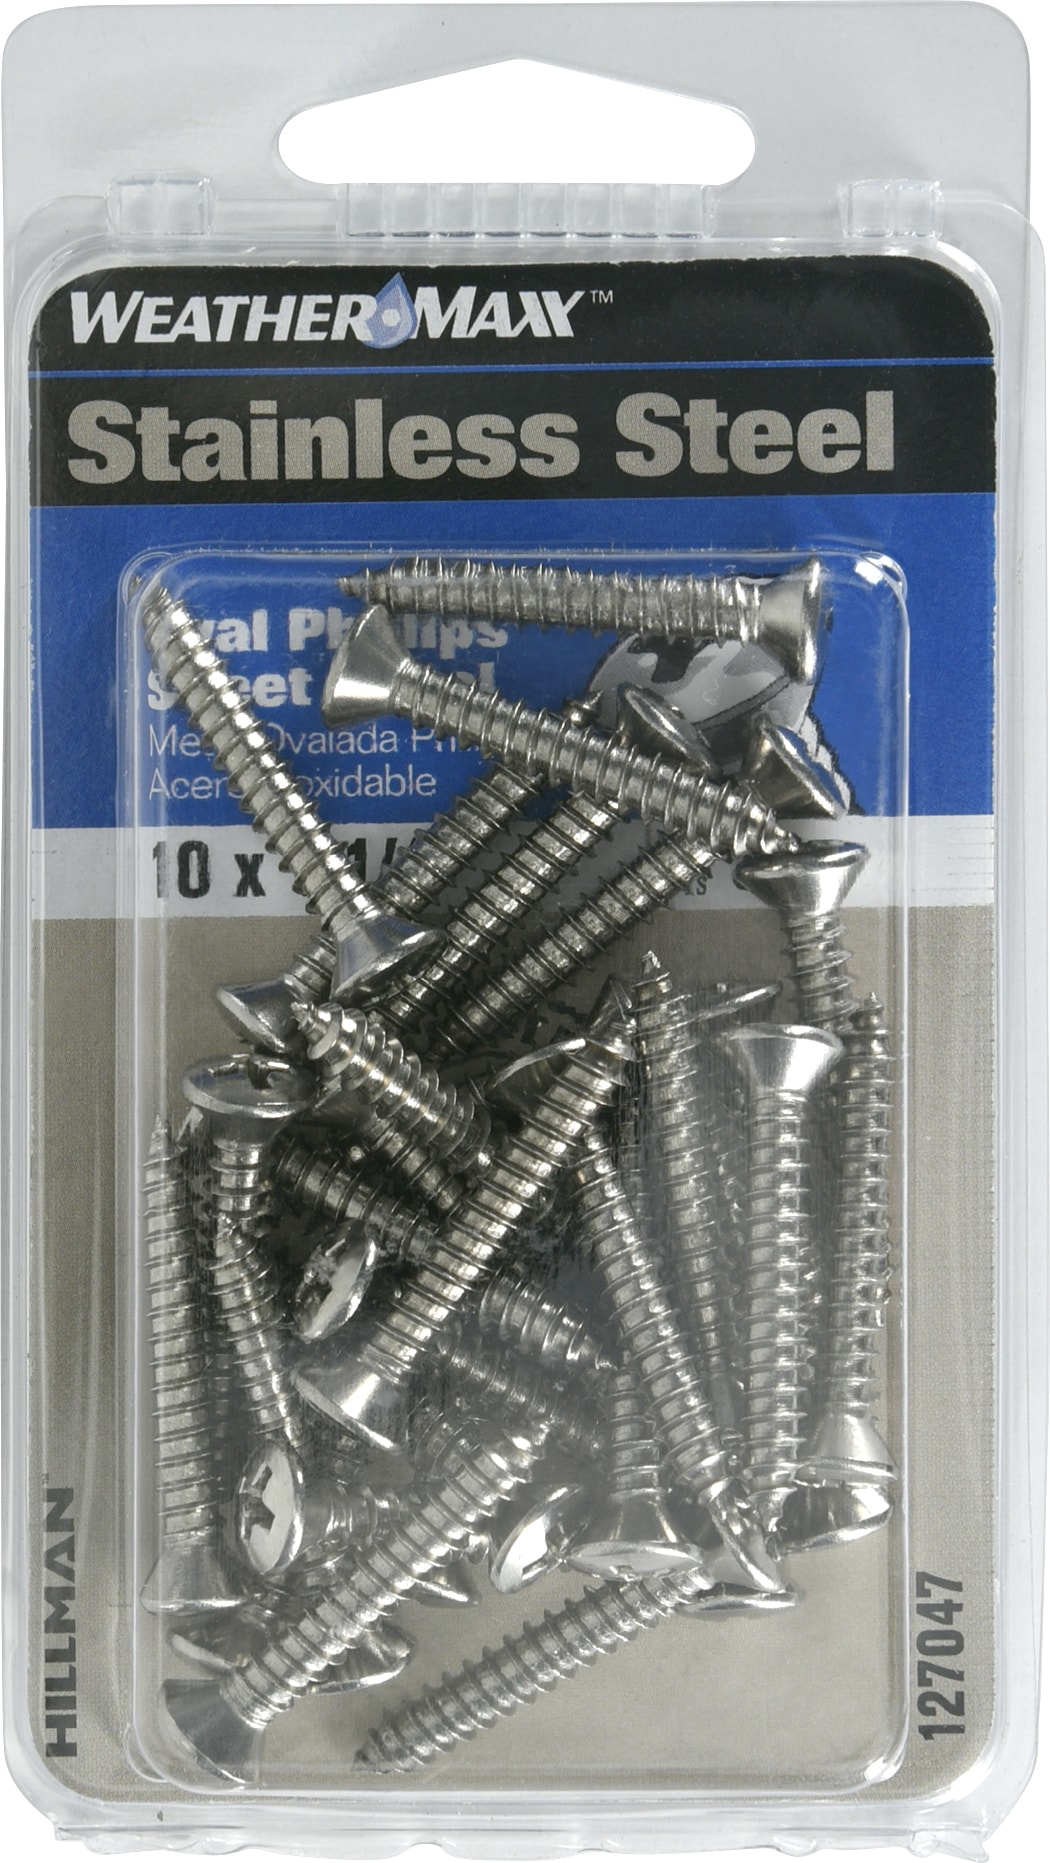 10 X 1-1/2 Stainless Steel Deck Screw, Square Drive (1-lb)